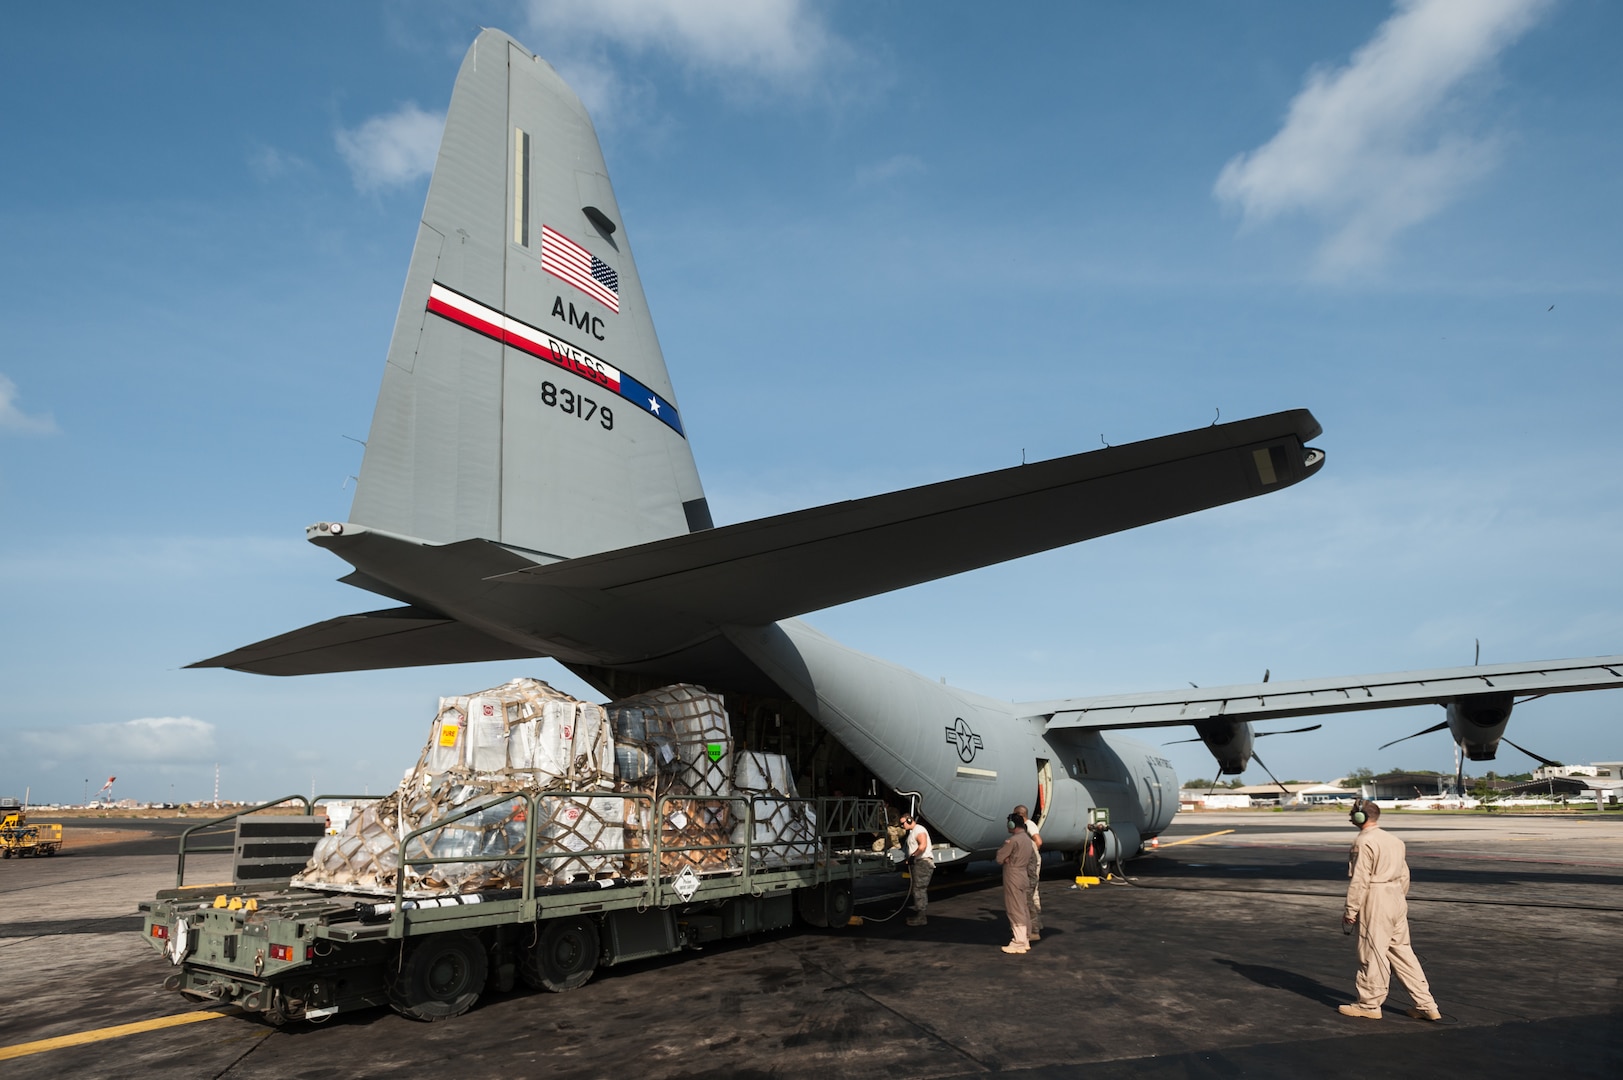 Aerial porters from the Kentucky Air National Guard’s 123rd Contingency Response Group load 8 tons of humanitarian aid and military supplies onto a U.S. Air Force C-130 aircraft at Léopold Sédar Senghor International Airport in Dakar, Senegal, Nov. 4, 2014. The aircraft and crew, from Dyess Air Force Base Texas, are deployed to Senegal as part of the 787th Air Expeditionary Squadron and will fly the cargo into Monrovia, Liberia, in support of Operation United Assistance, the U.S. Agency for International Development-led, whole-of-government effort to contain the Ebola virus outbreak in West Africa.